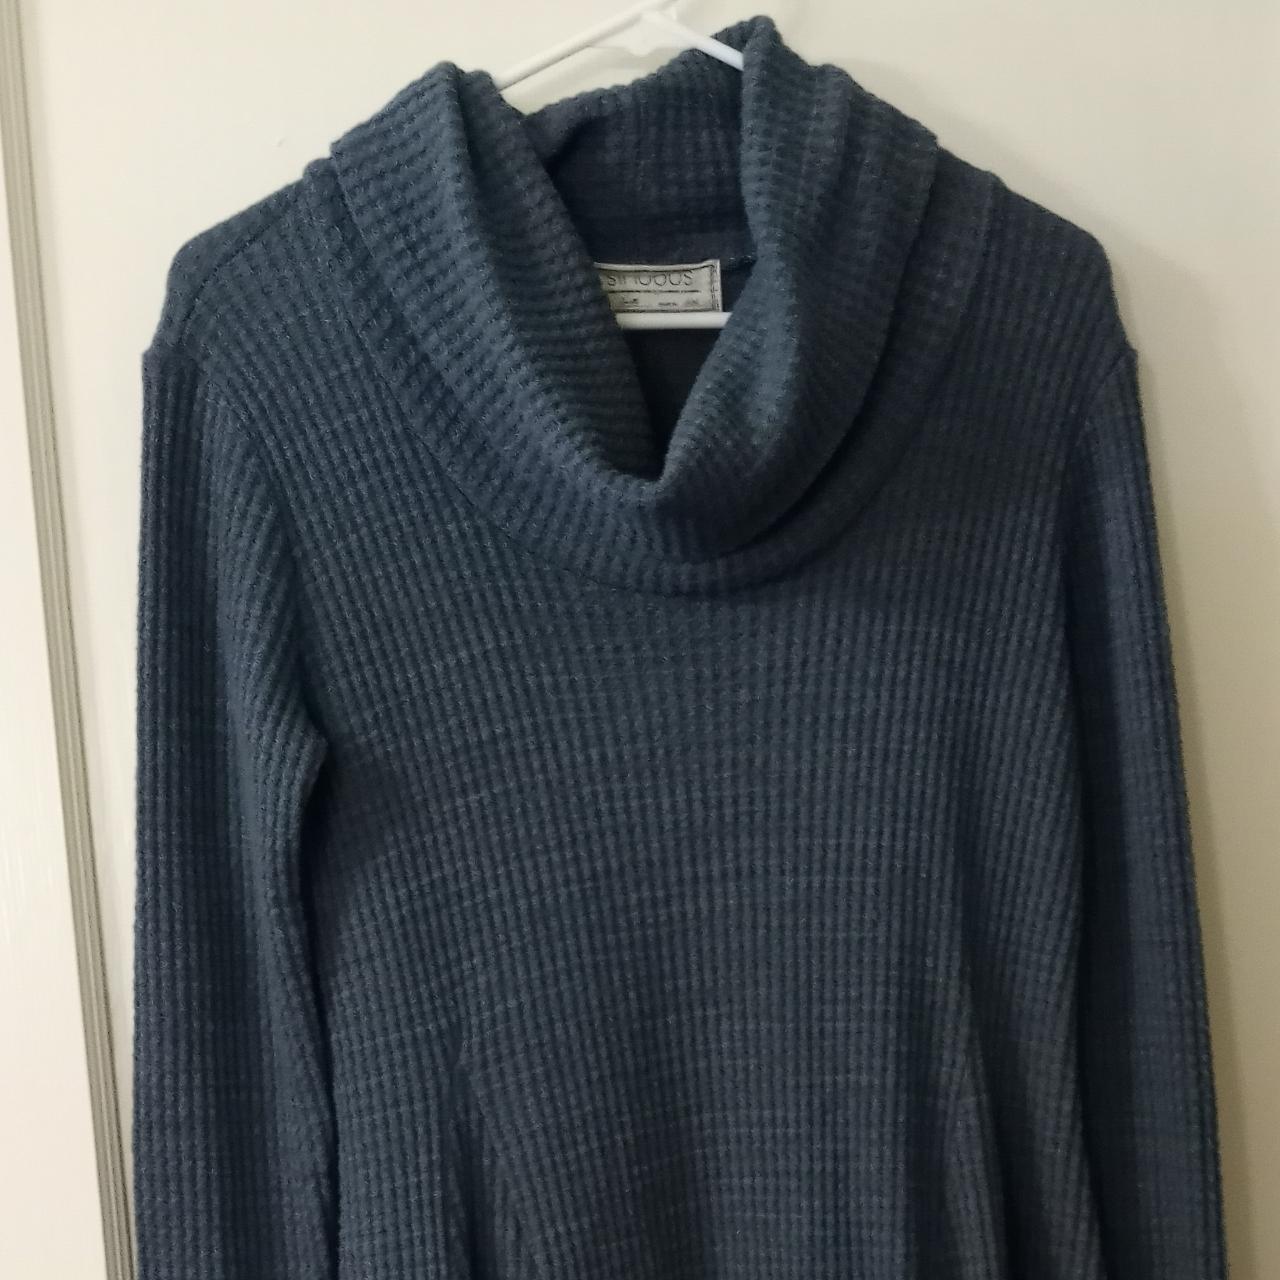 Sinuous Waffle Weave Cowl Neck Top - size small ... - Depop